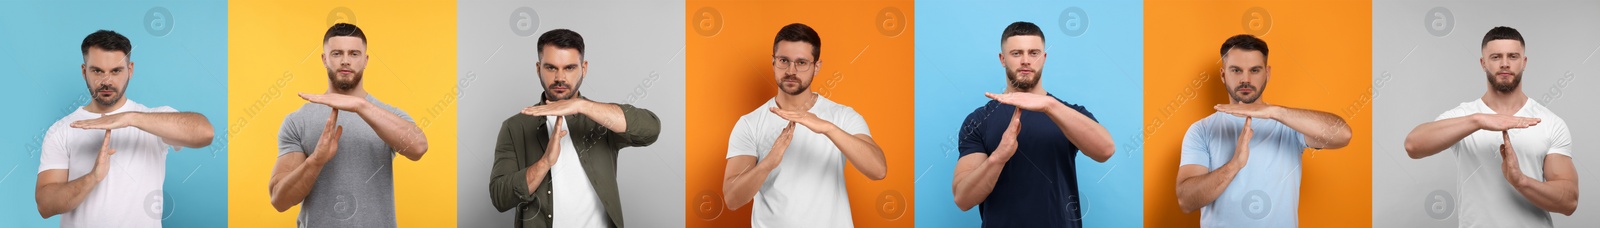 Image of Men showing time out gesture on different color backgrounds. Collage with photos